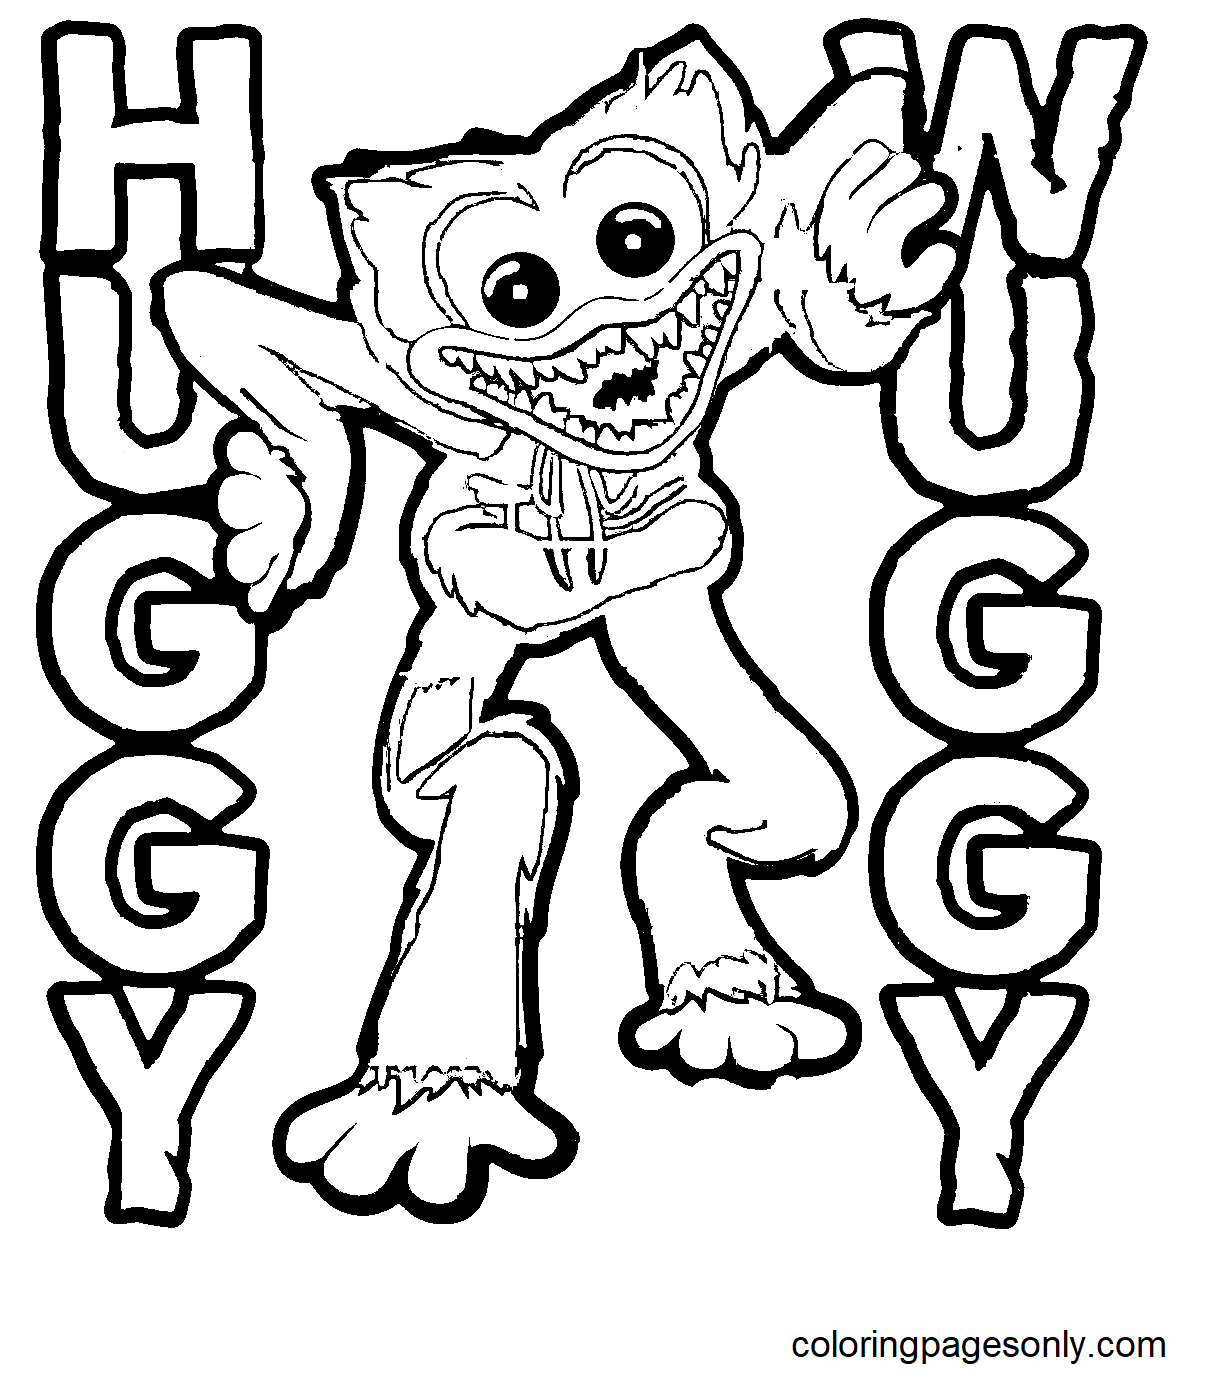 Huggy Wuggy Big Blue Monster Coloring Page